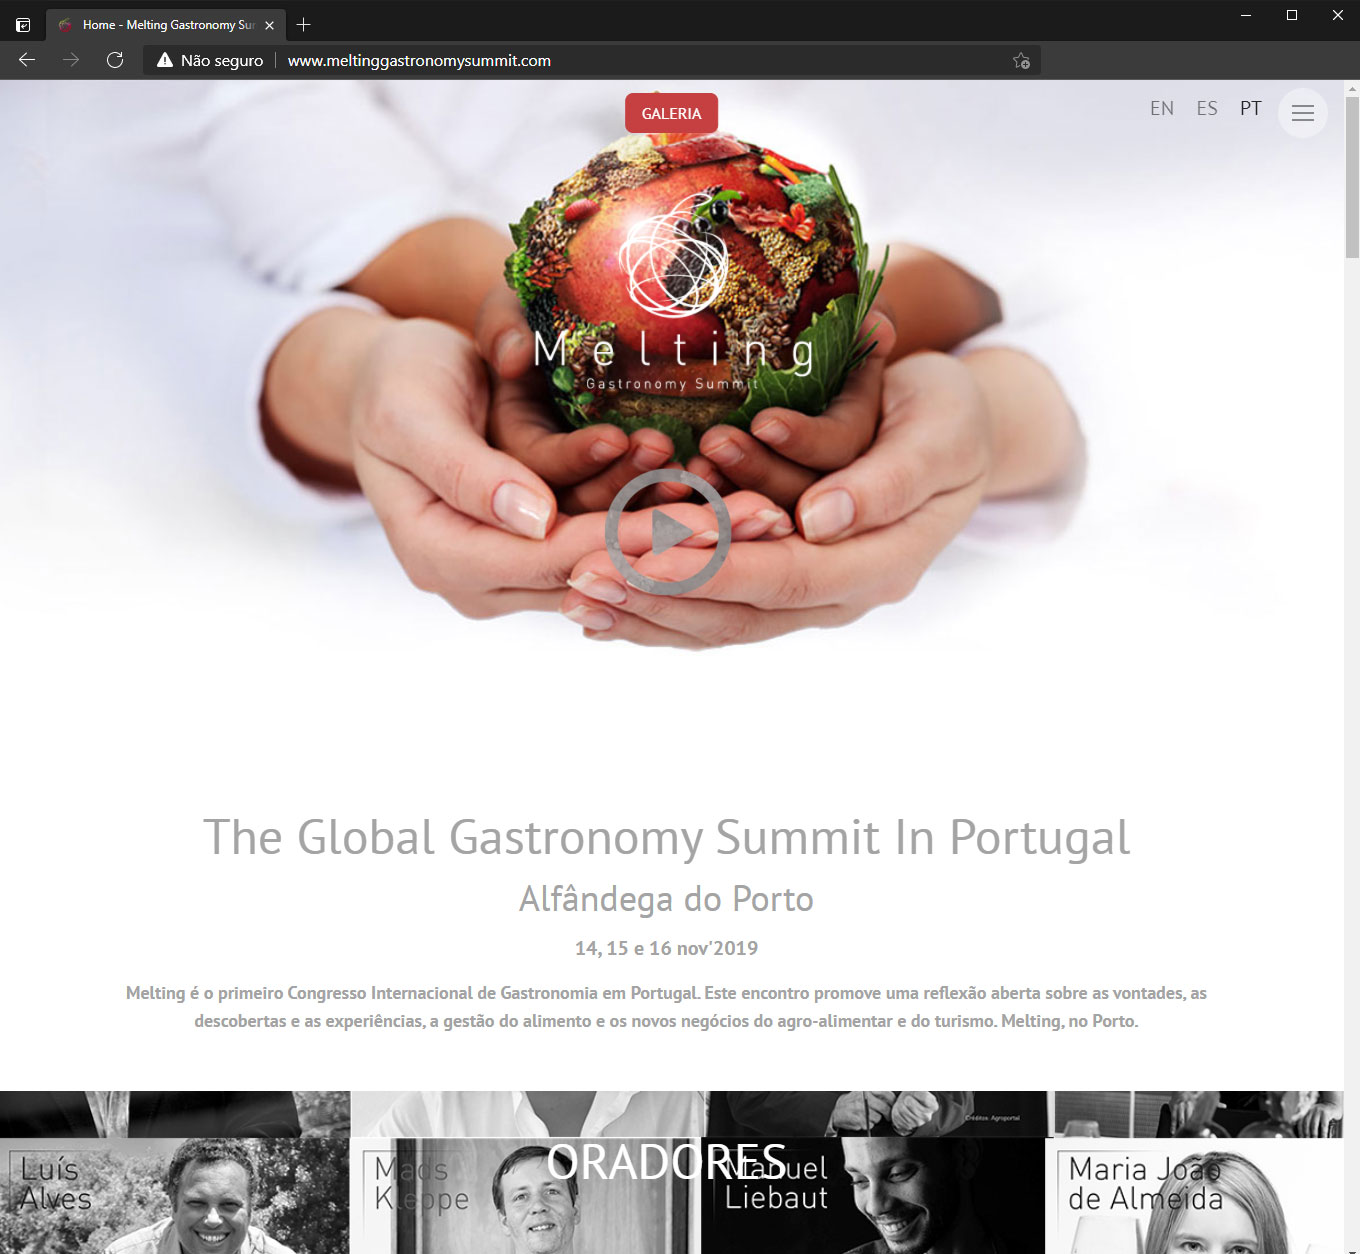 Melting Gastronomy Summit In Portugal